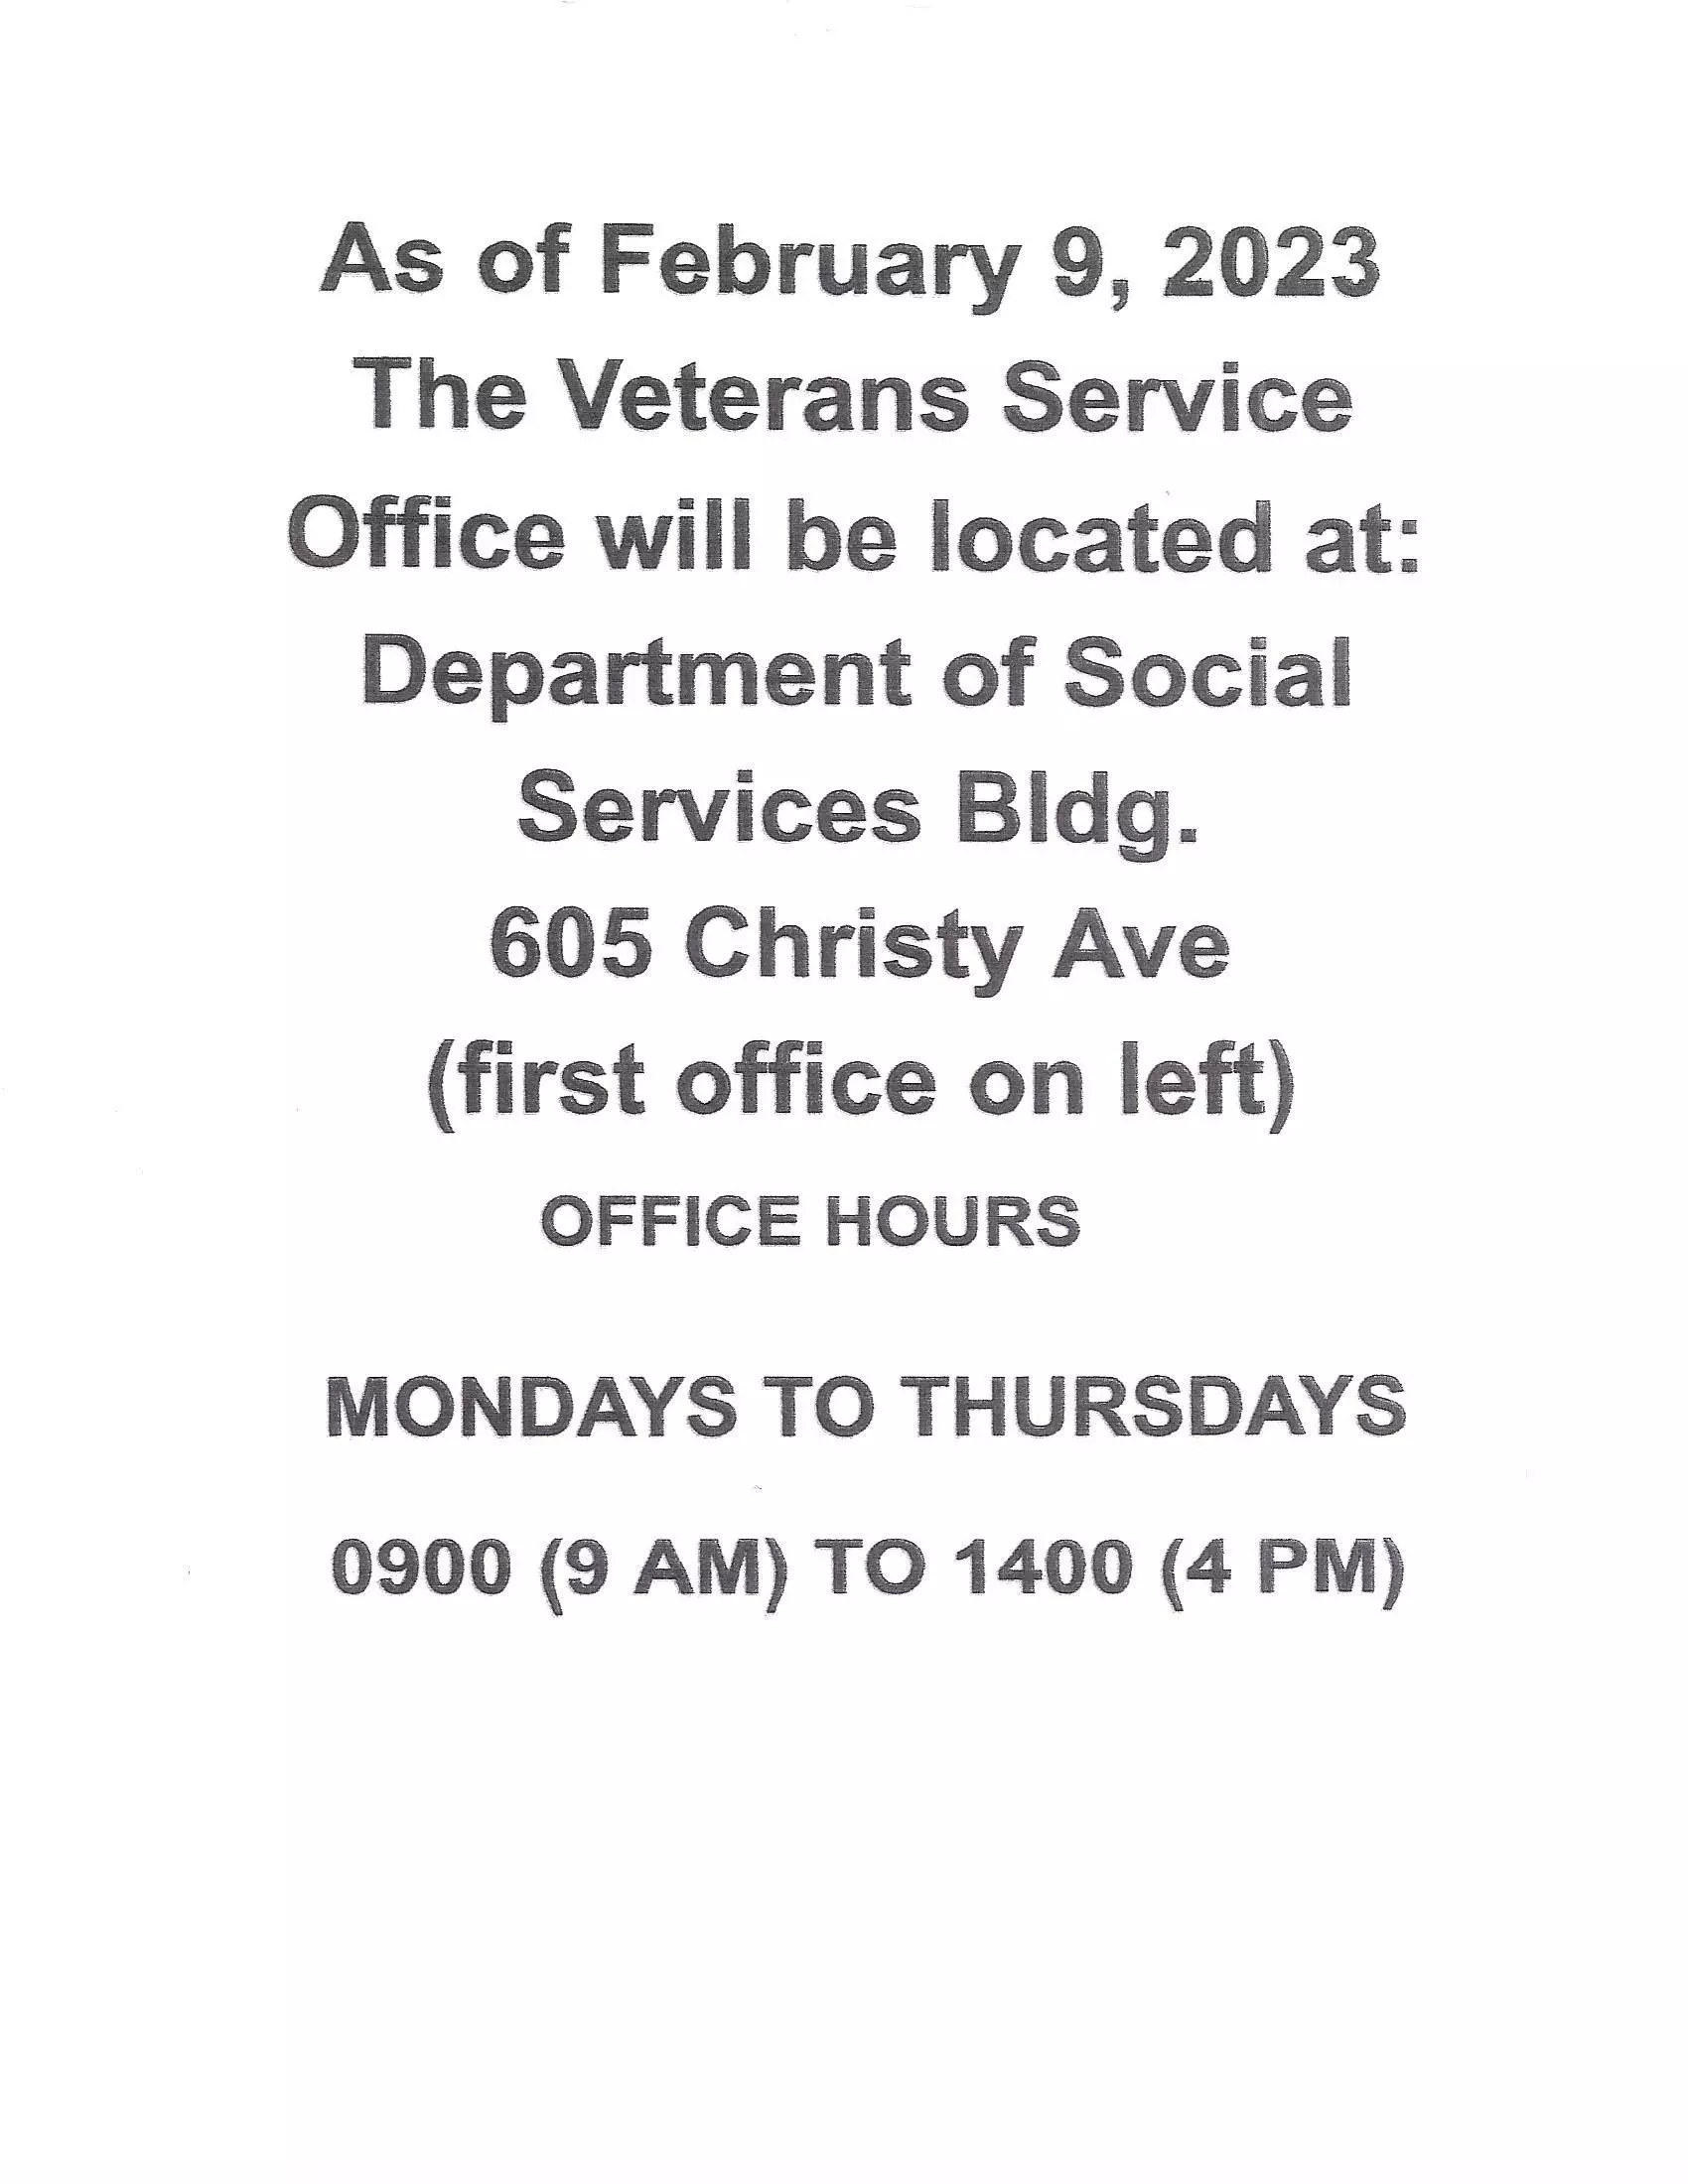 As of February 9, 2023 The Veterans Service Office will be located at: Department of Social Services Bldg. 605 Christy Ave (first office on left) Mondays to Thursdays 0900 (9AM) to 1400 (4 PM)